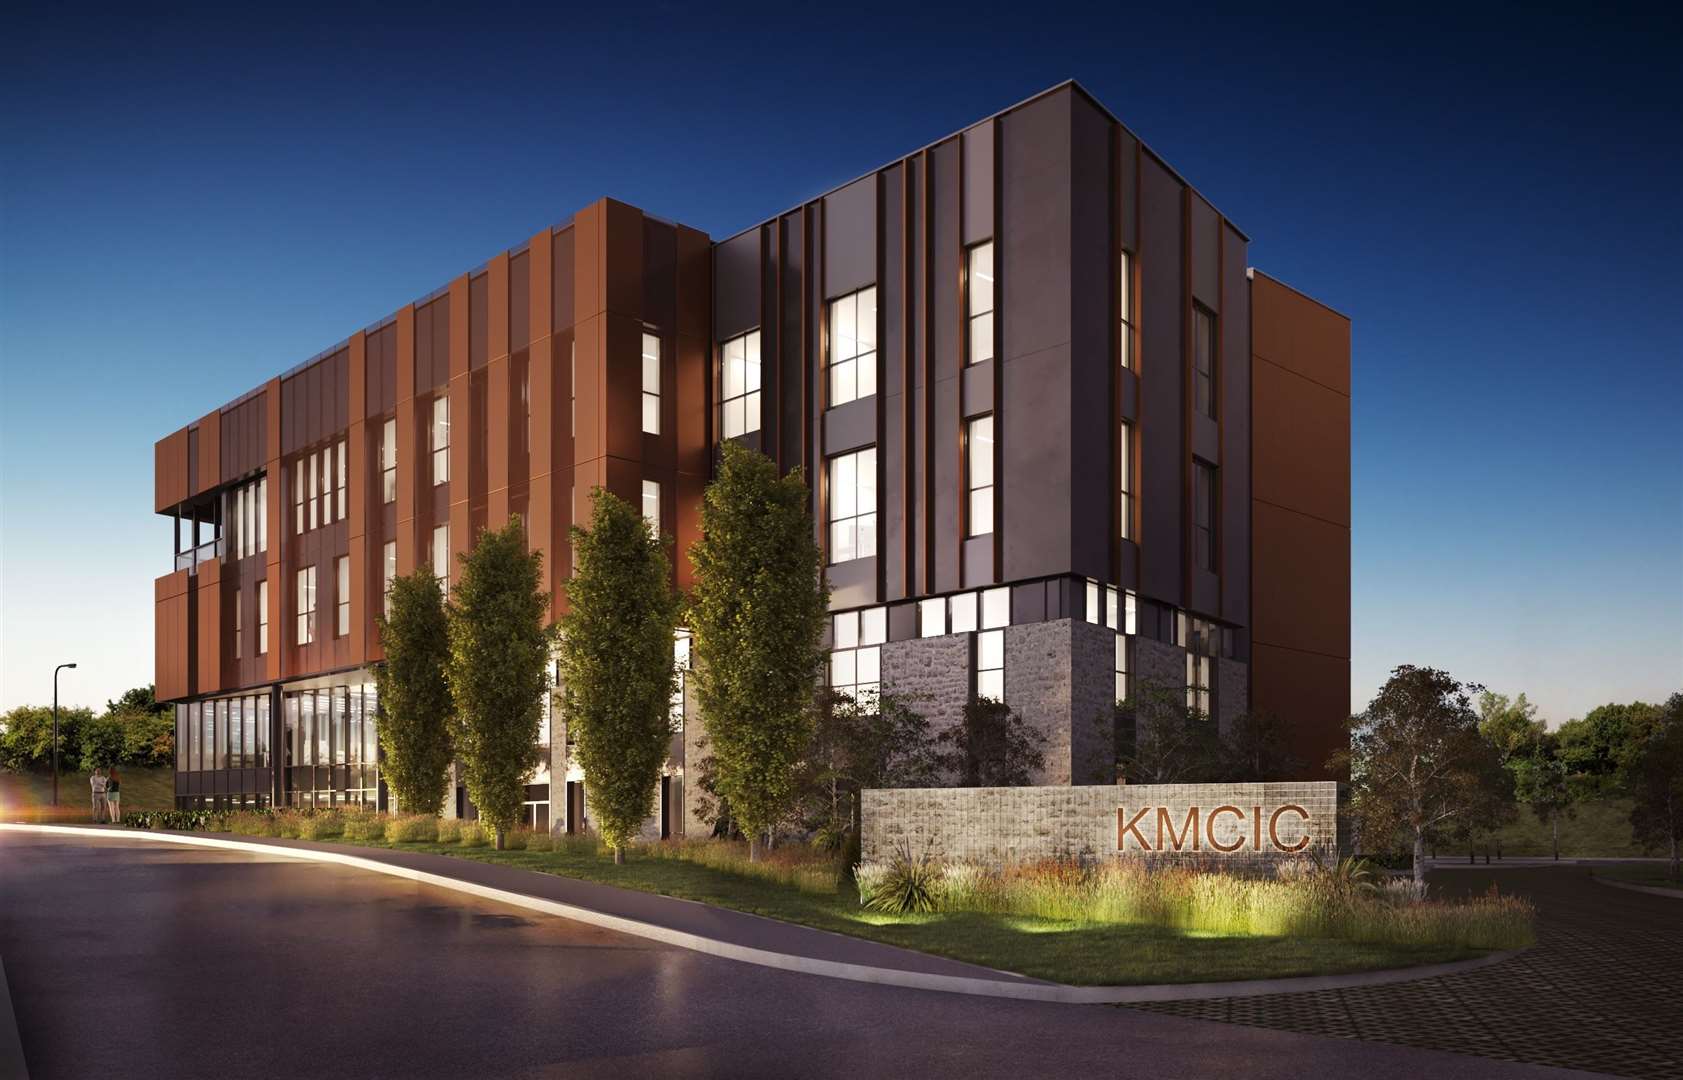 Artist's impression of the proposed Innovation Centre at Kent Medical Campus